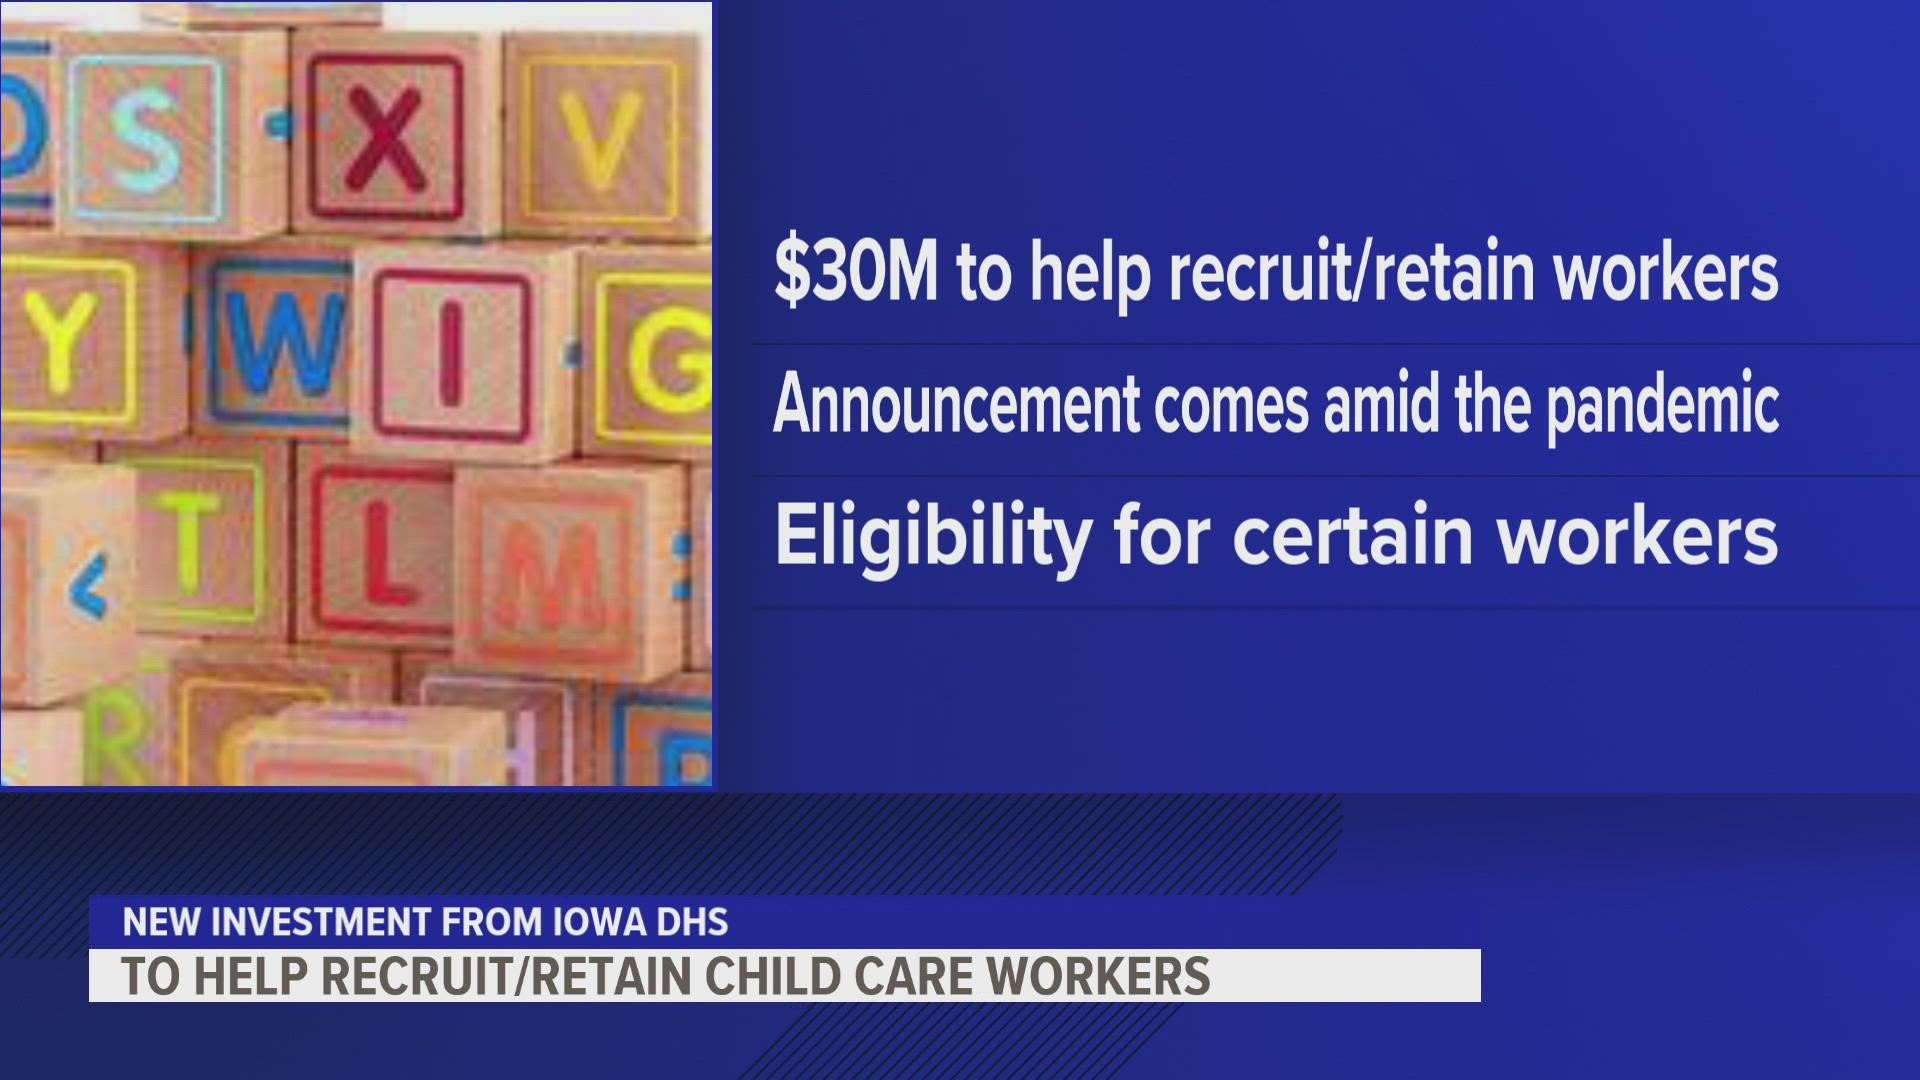 The Iowa Department of Human Services says current child development home operators, licensed child care staff and newly hired staff will be eligible for the bonus.